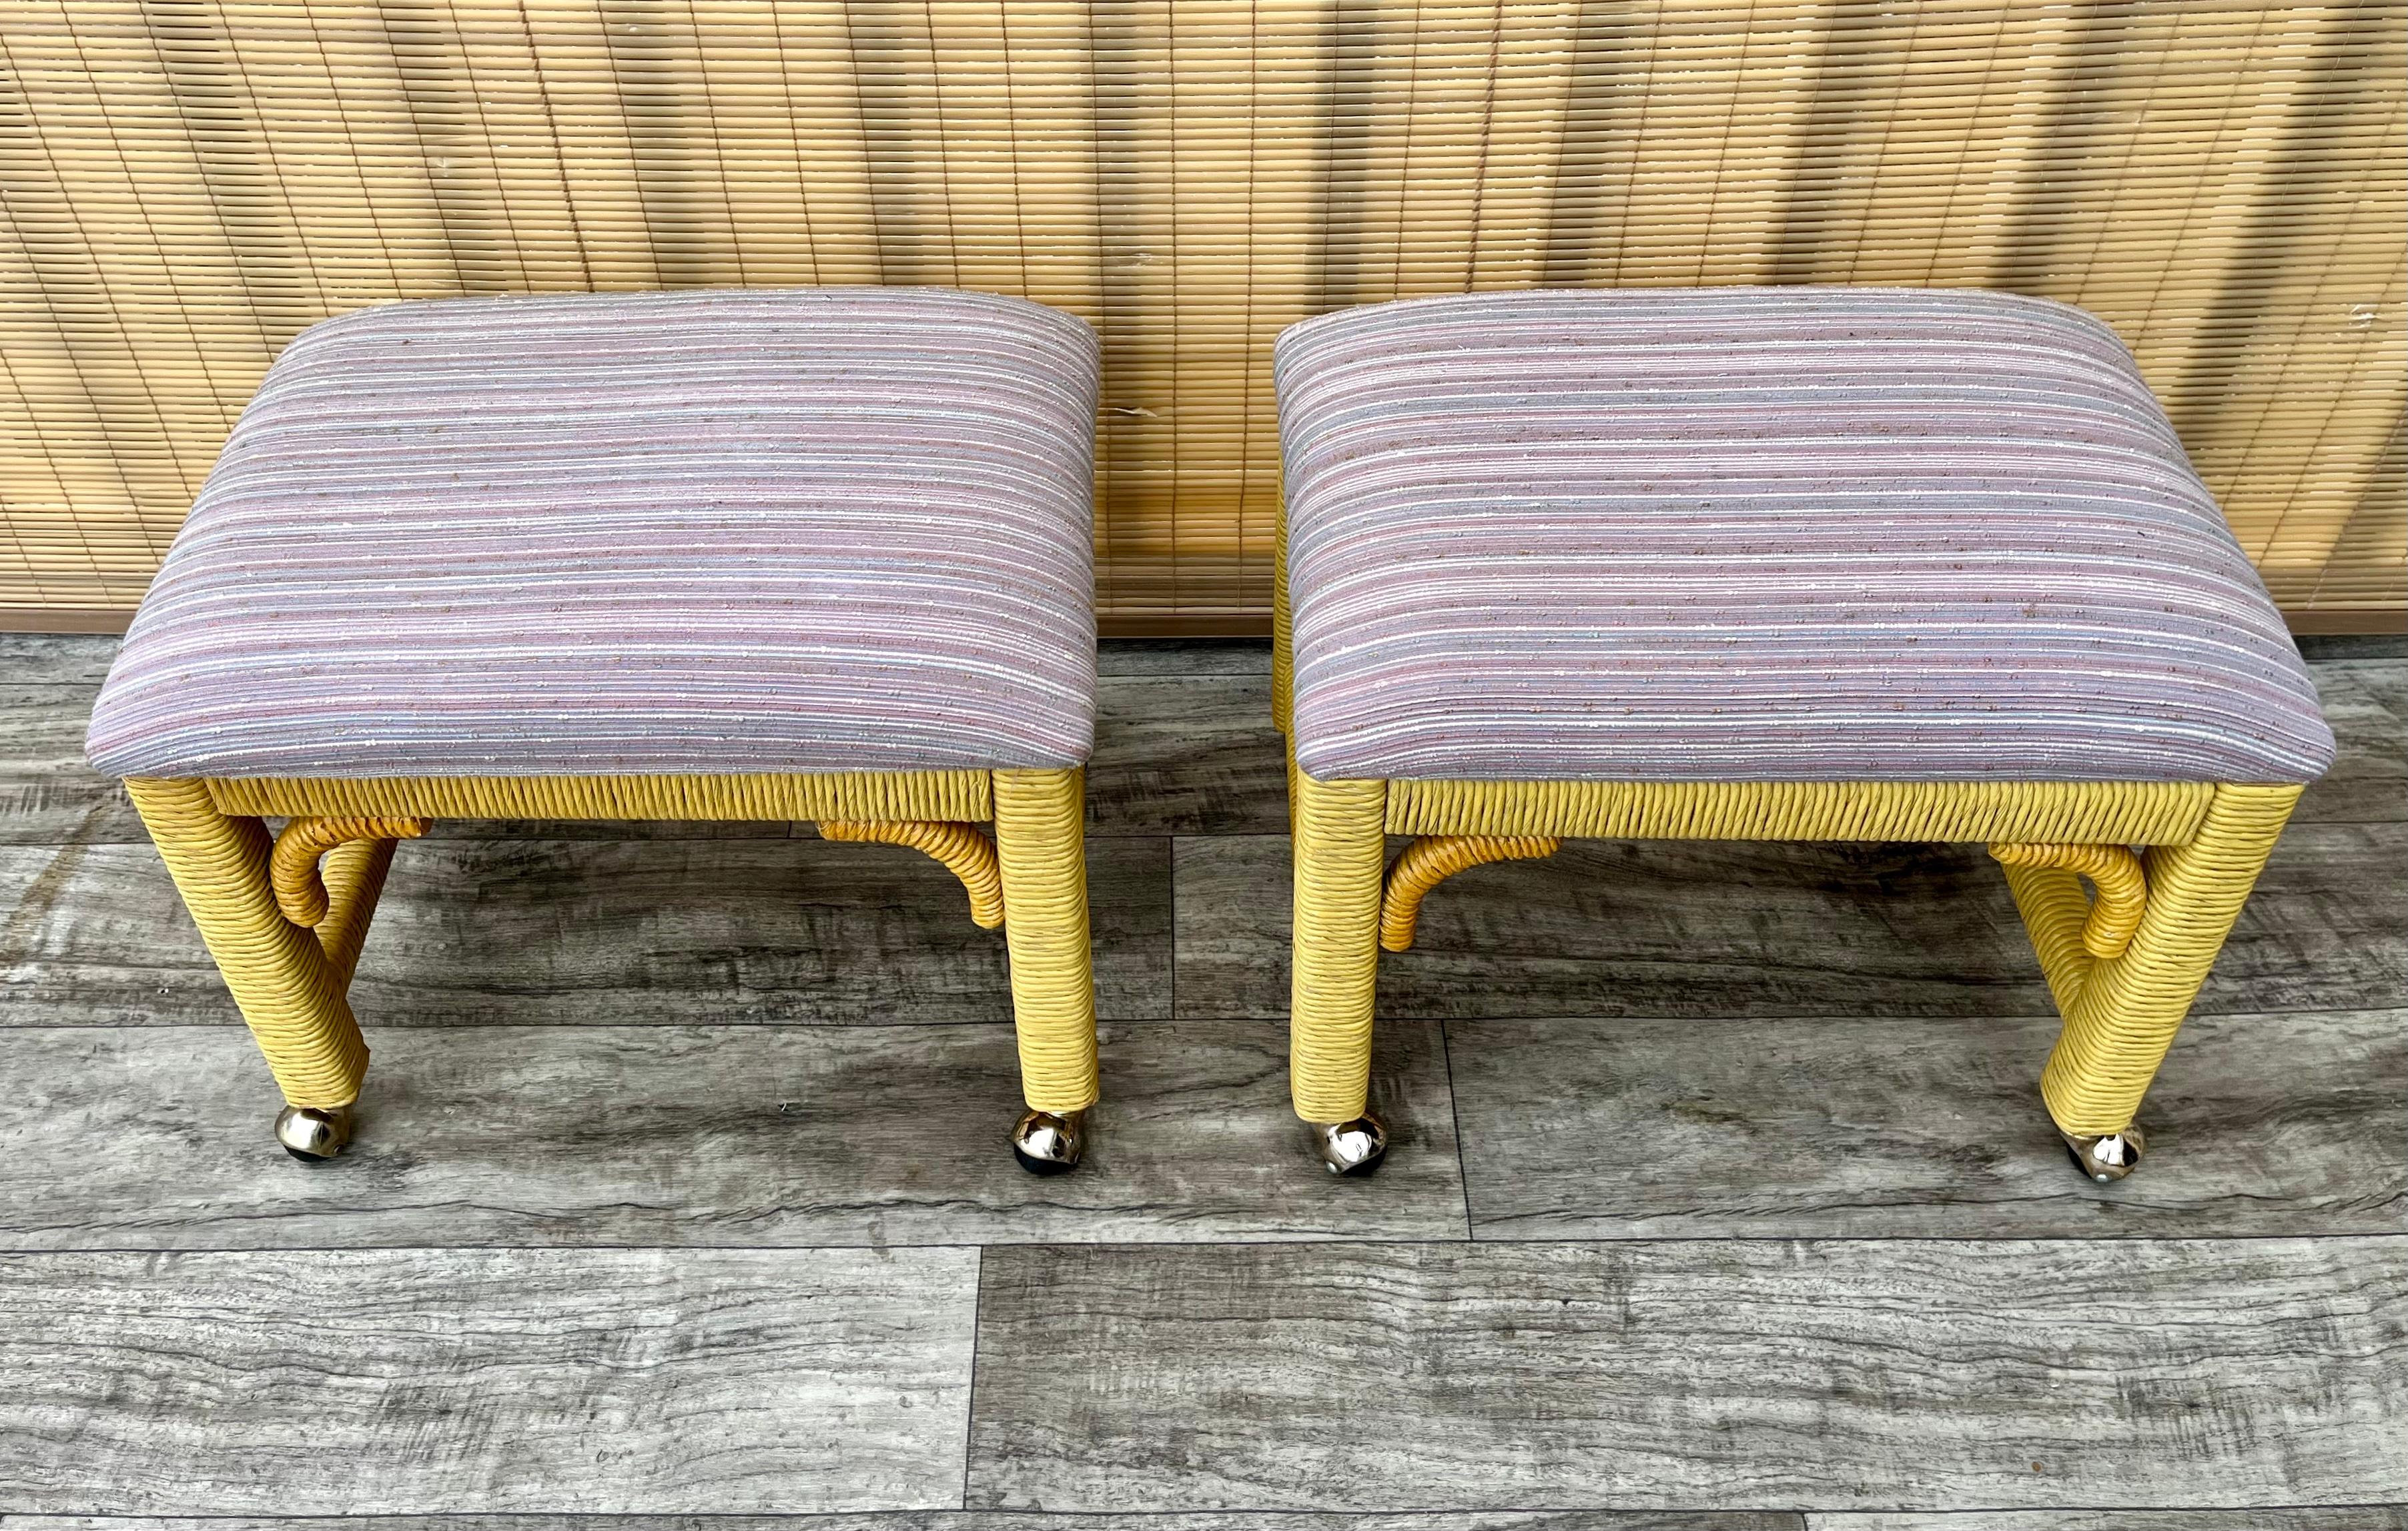 Bohemian A Pair of Coastal Style Rolling Footstools on Casters by Henry Link Furniture. For Sale